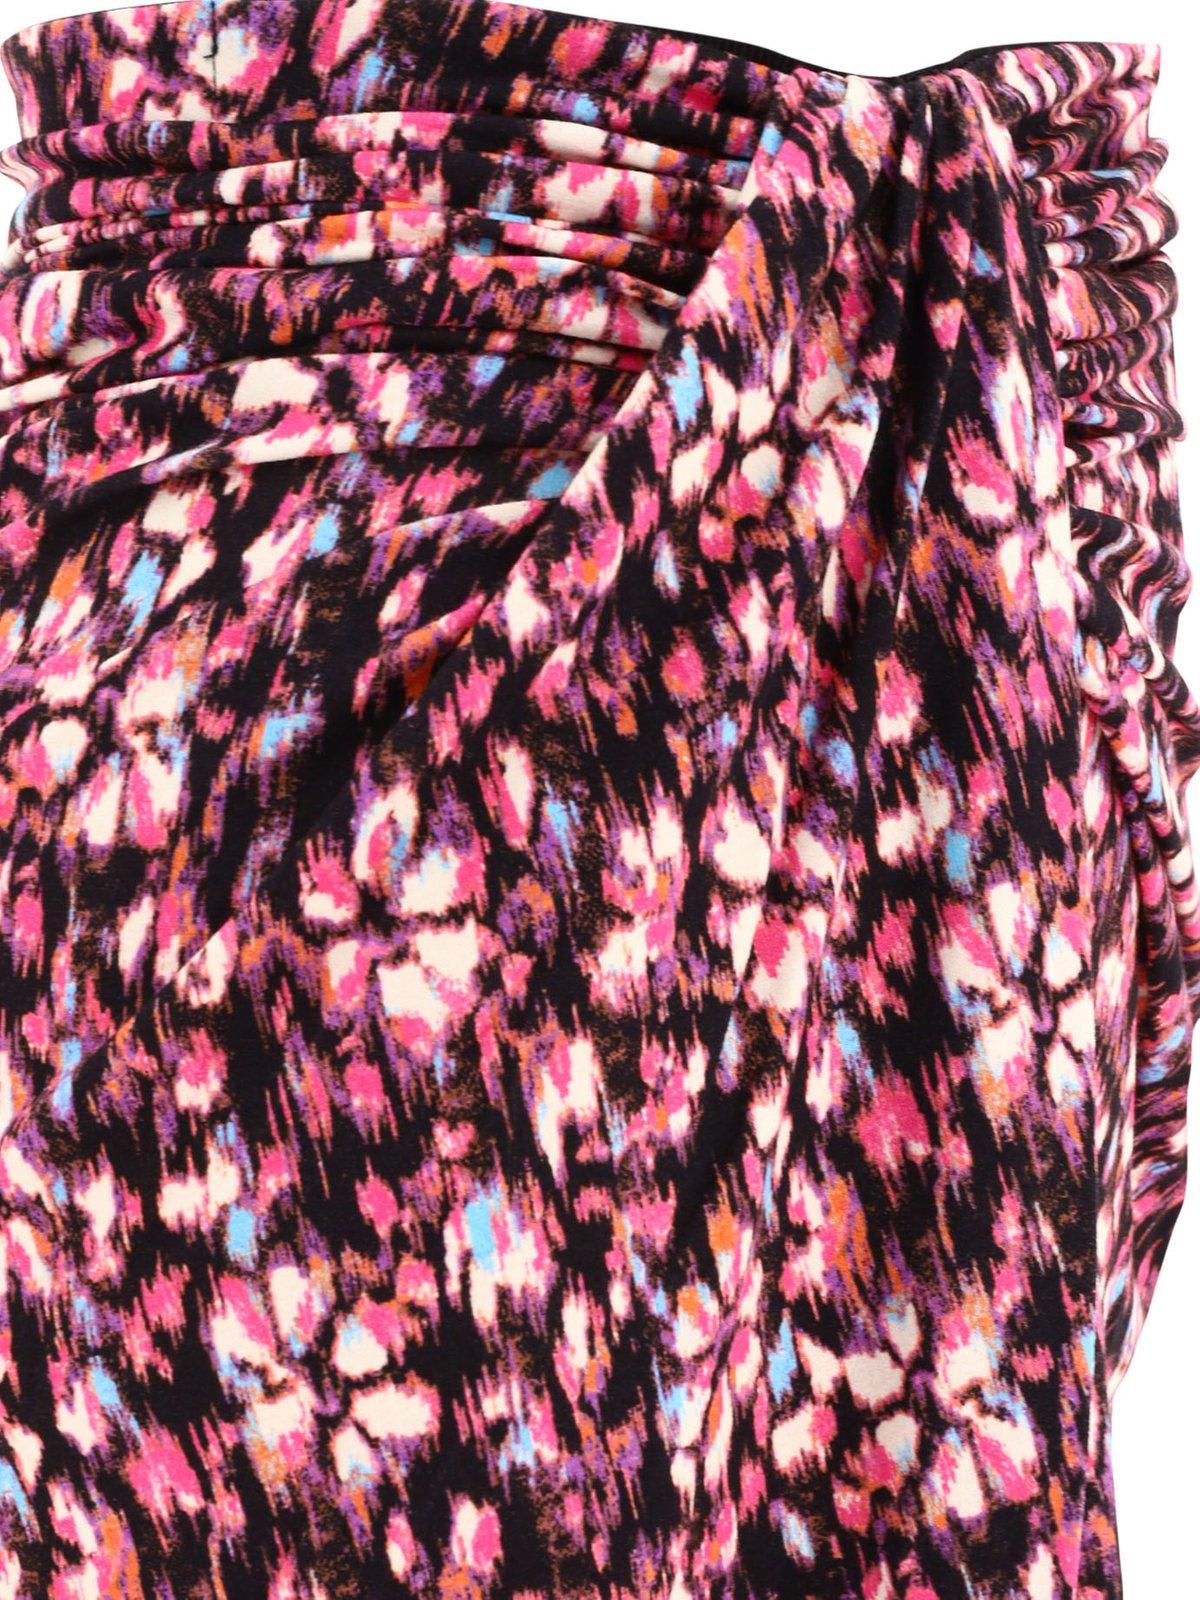 Shop Marant Etoile Floral-printed Twist-detailed Crepe Skirt In Midnight Pink